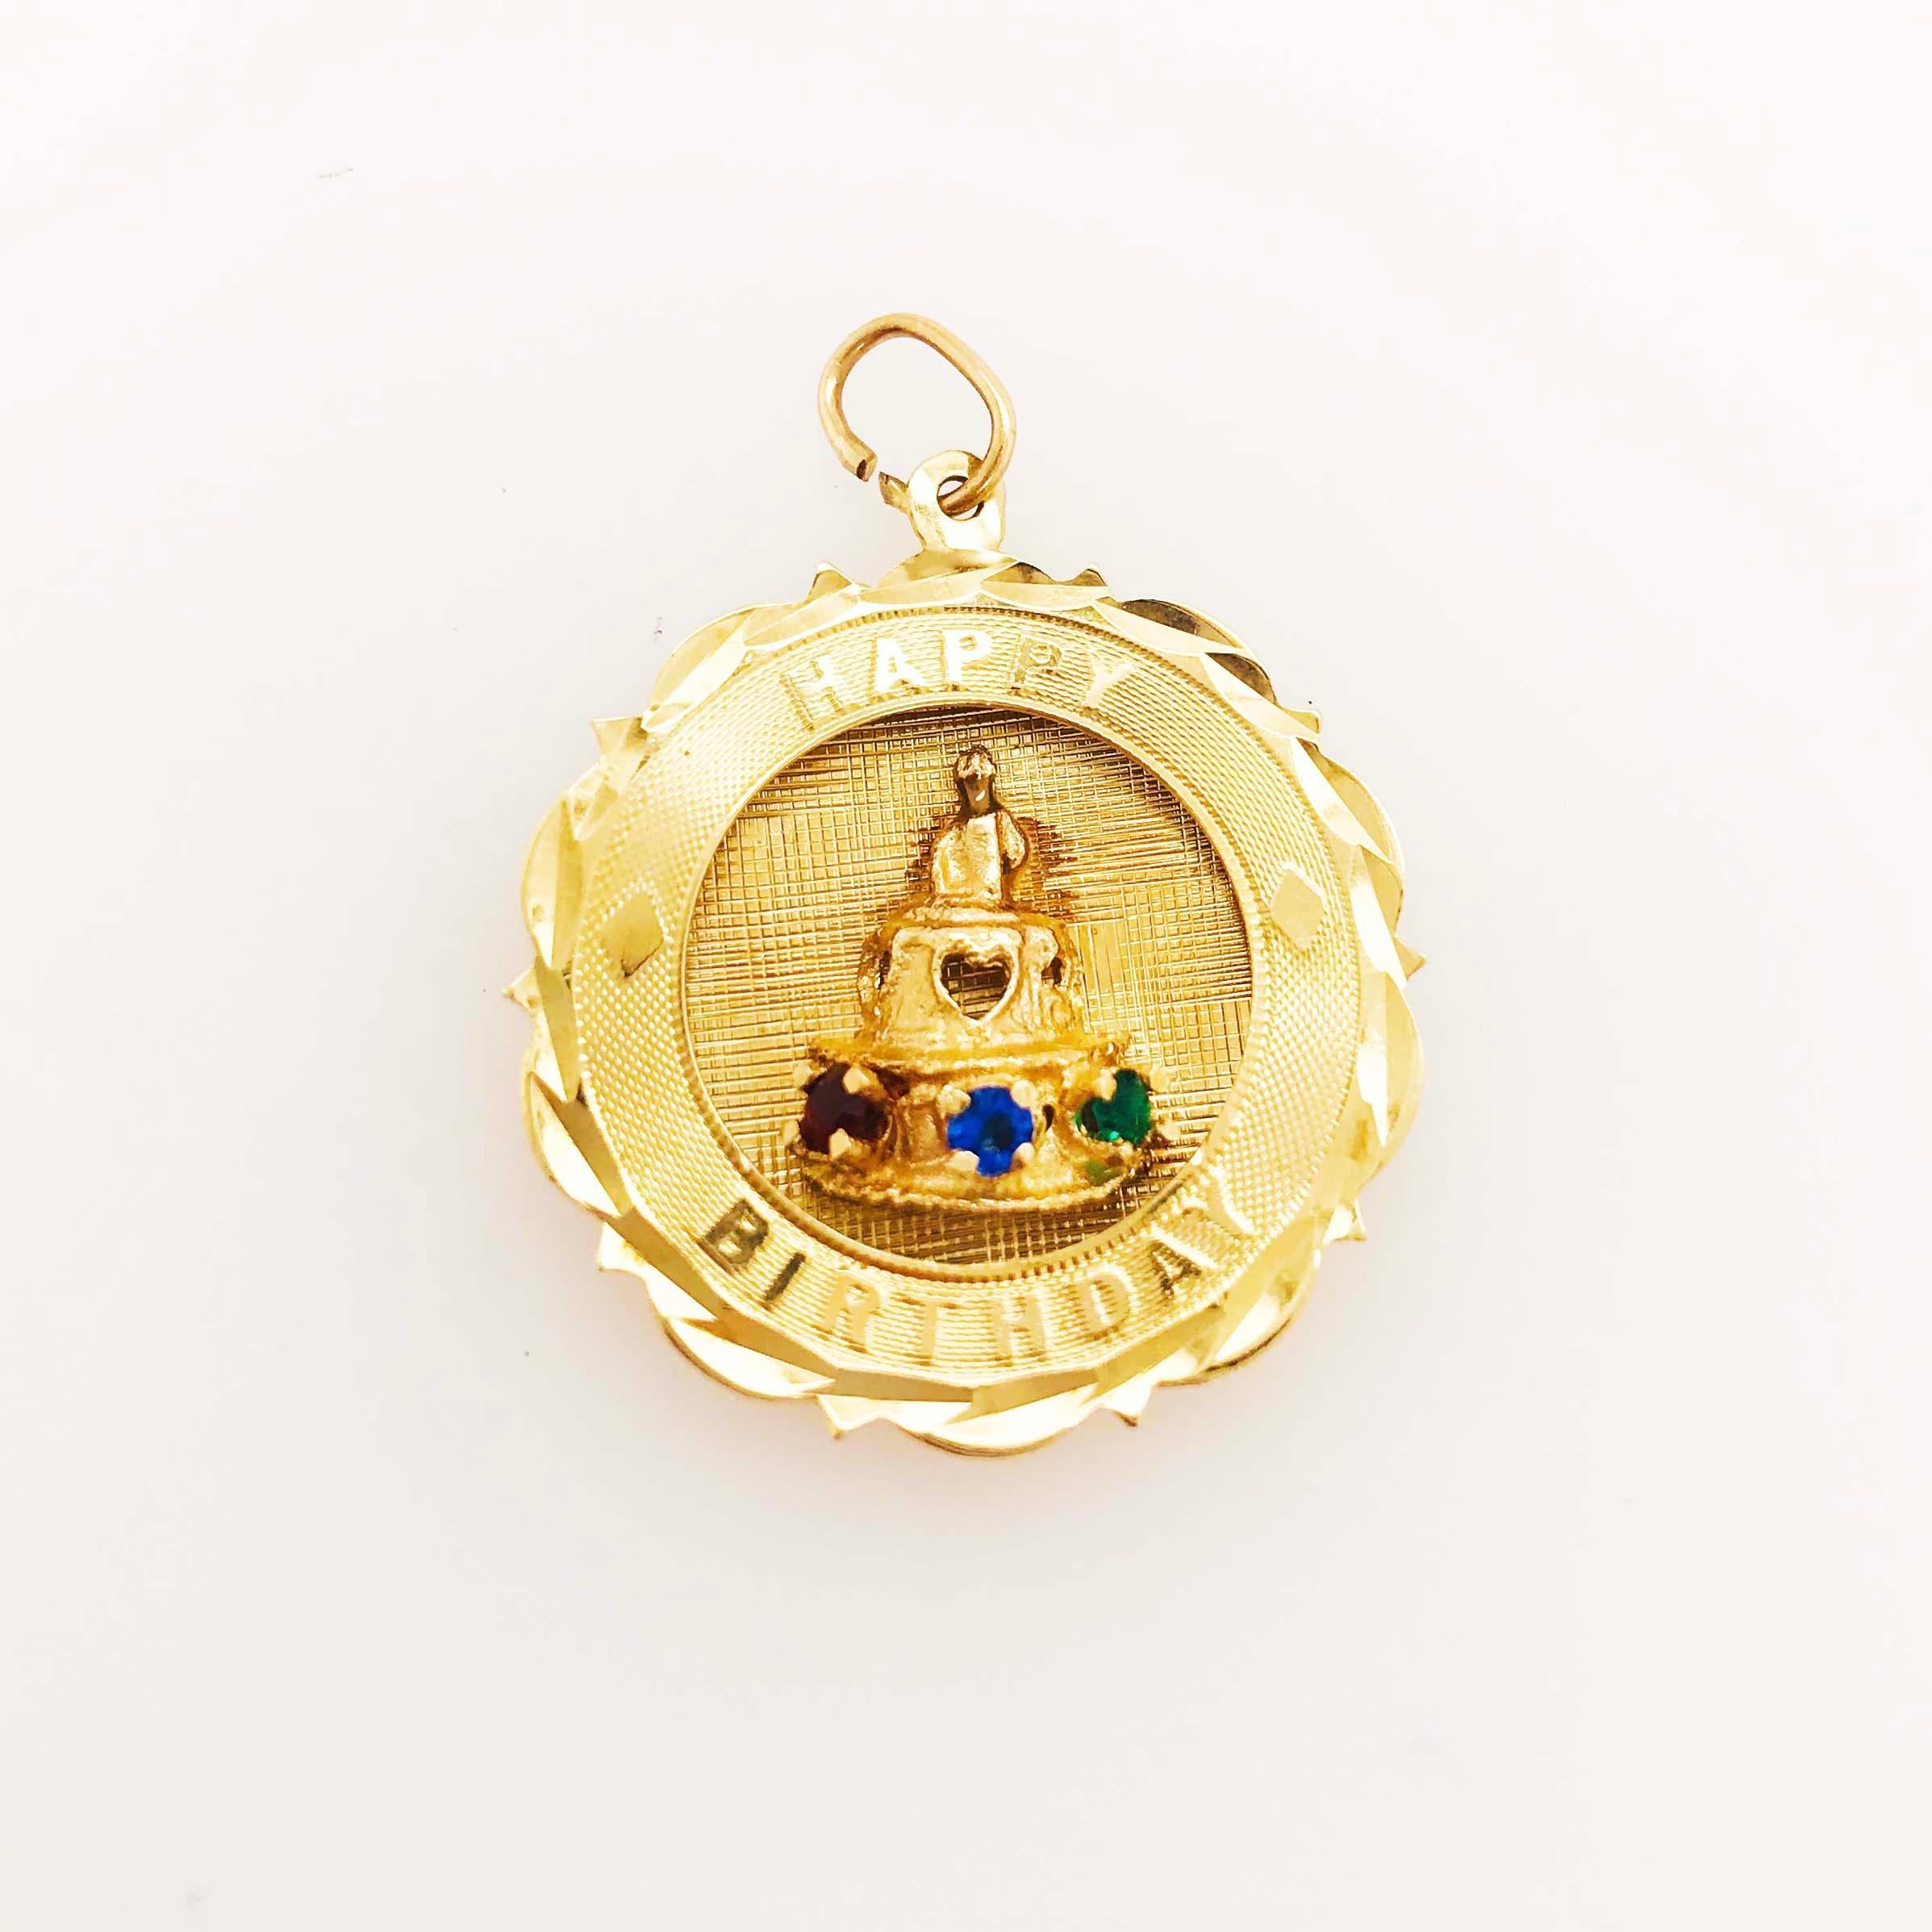 No better way to say I love you than a special gift she can wear everyday! This handmade Happy Birthday charm can a symbol of any birthday and it is a fine jewelry piece made with solid 14 karat yellow gold and genuine gemstones set on the front.